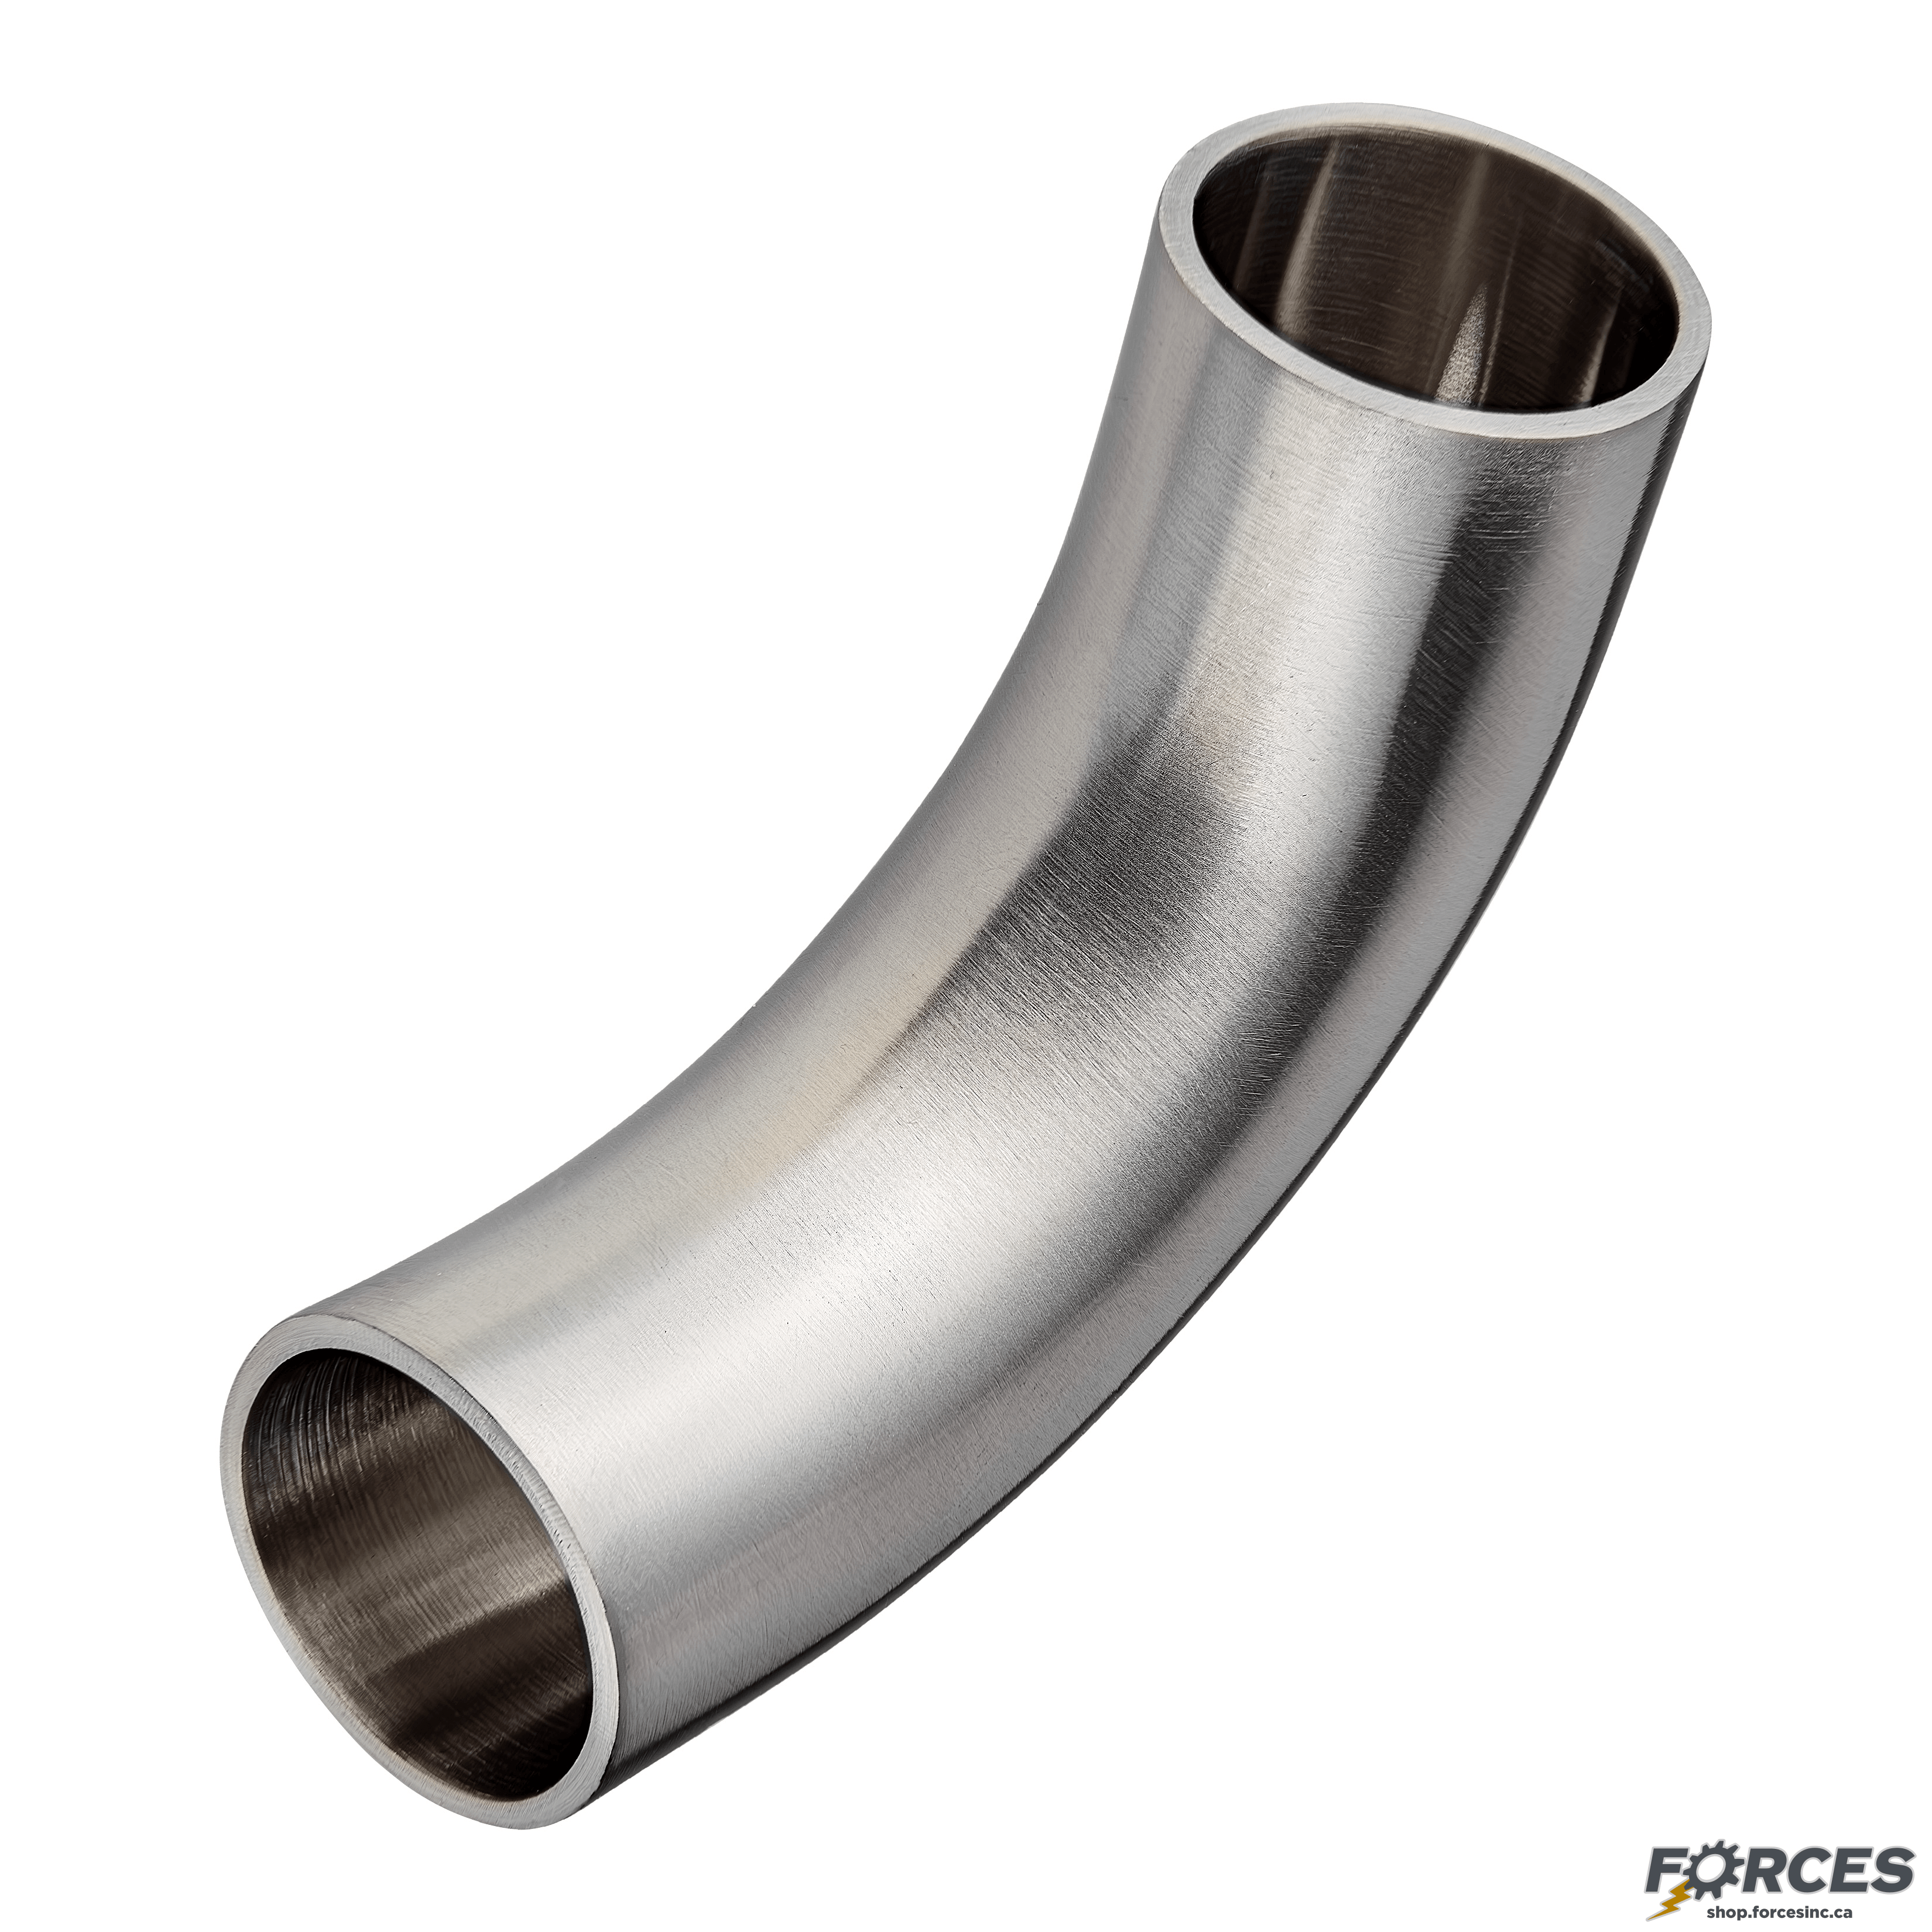 3" Butt Weld 90° Elbow Long Tangent - Stainless Steel 316 - Forces Inc